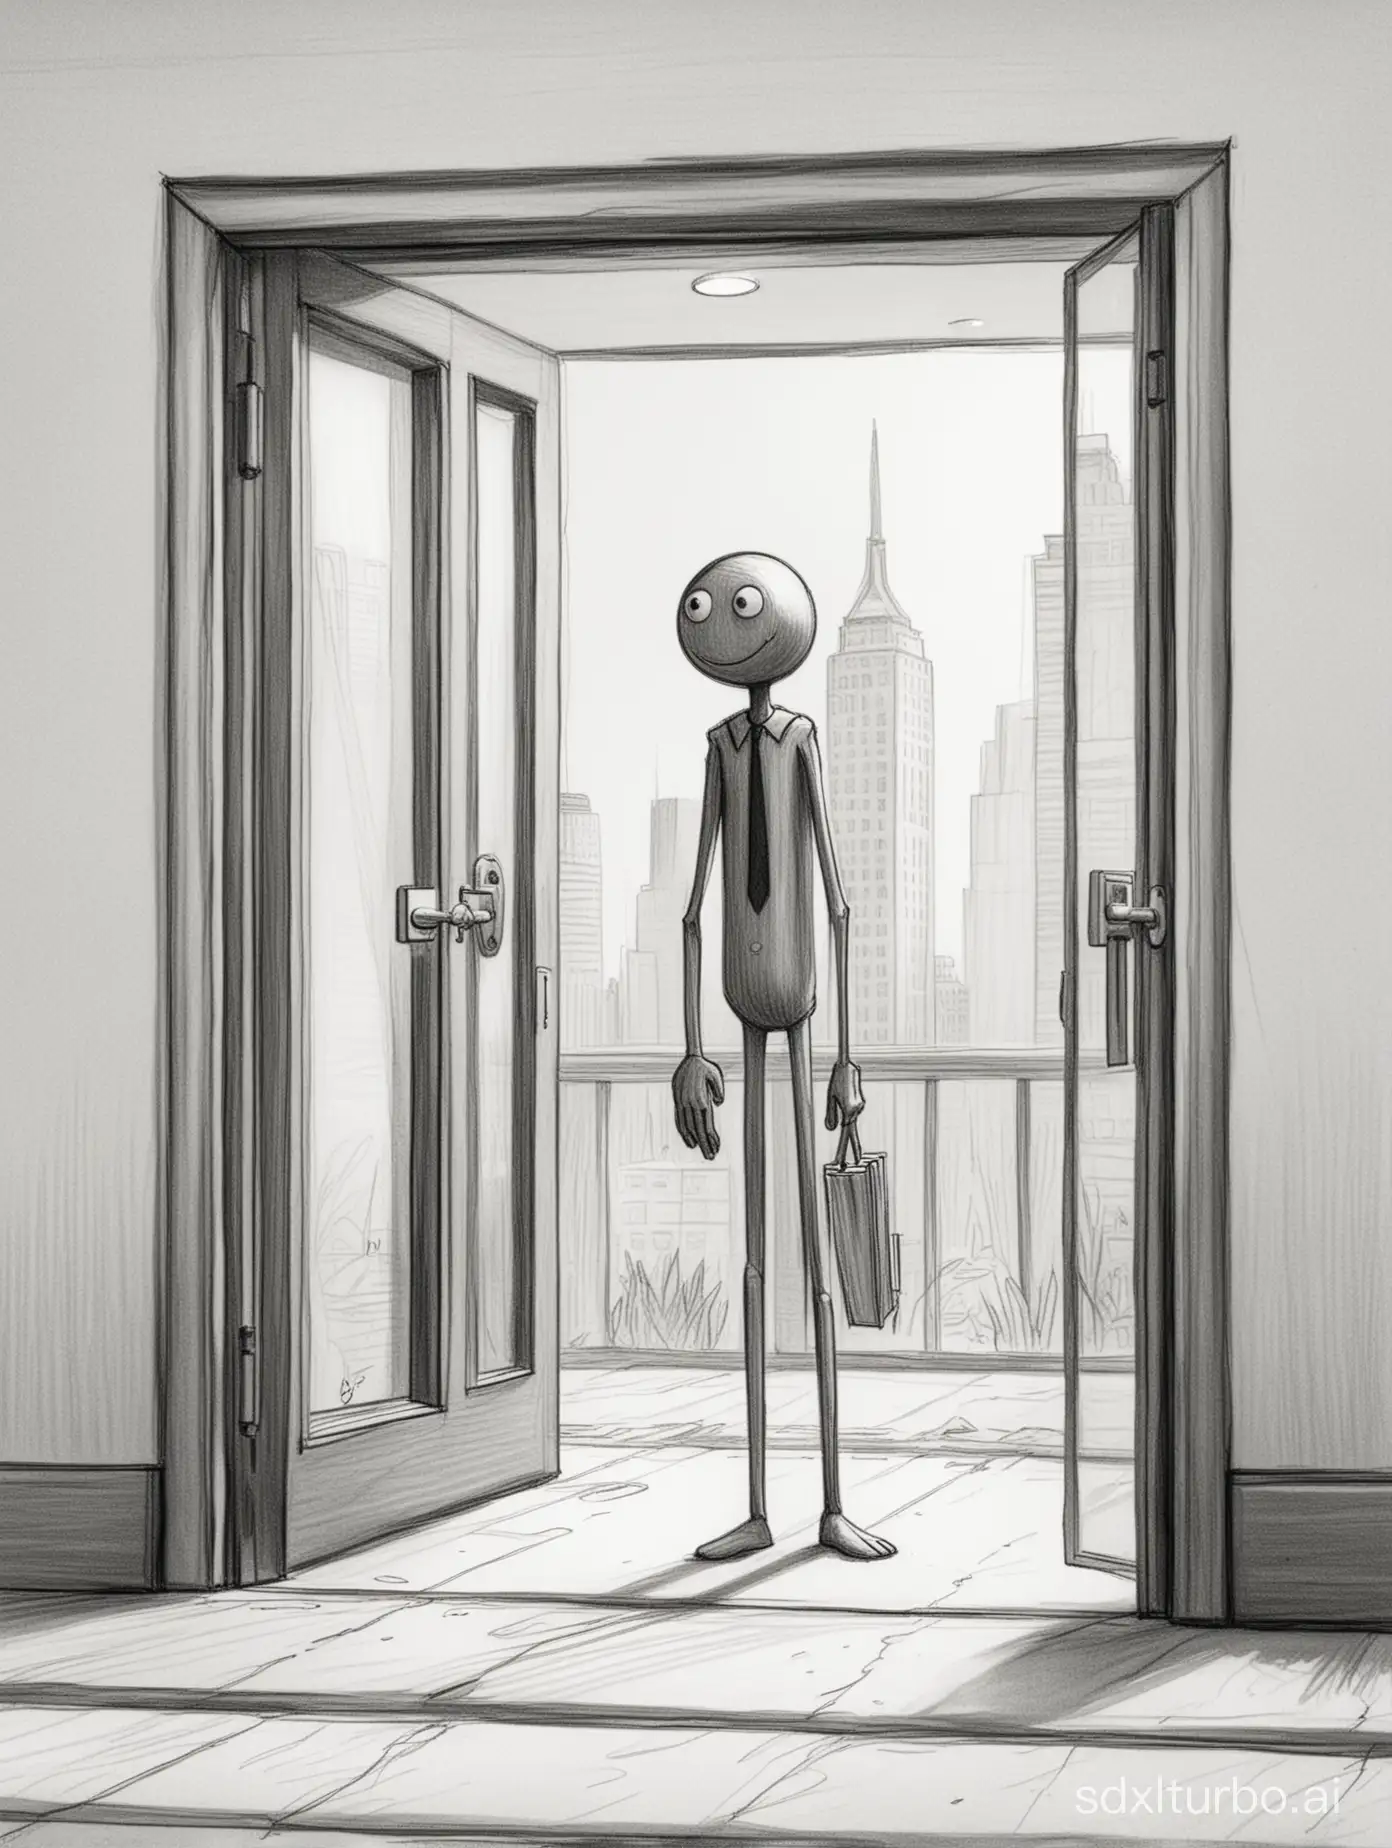 a stickman in the cartoon bw corporate city visits office entrance, pencil raw sketch